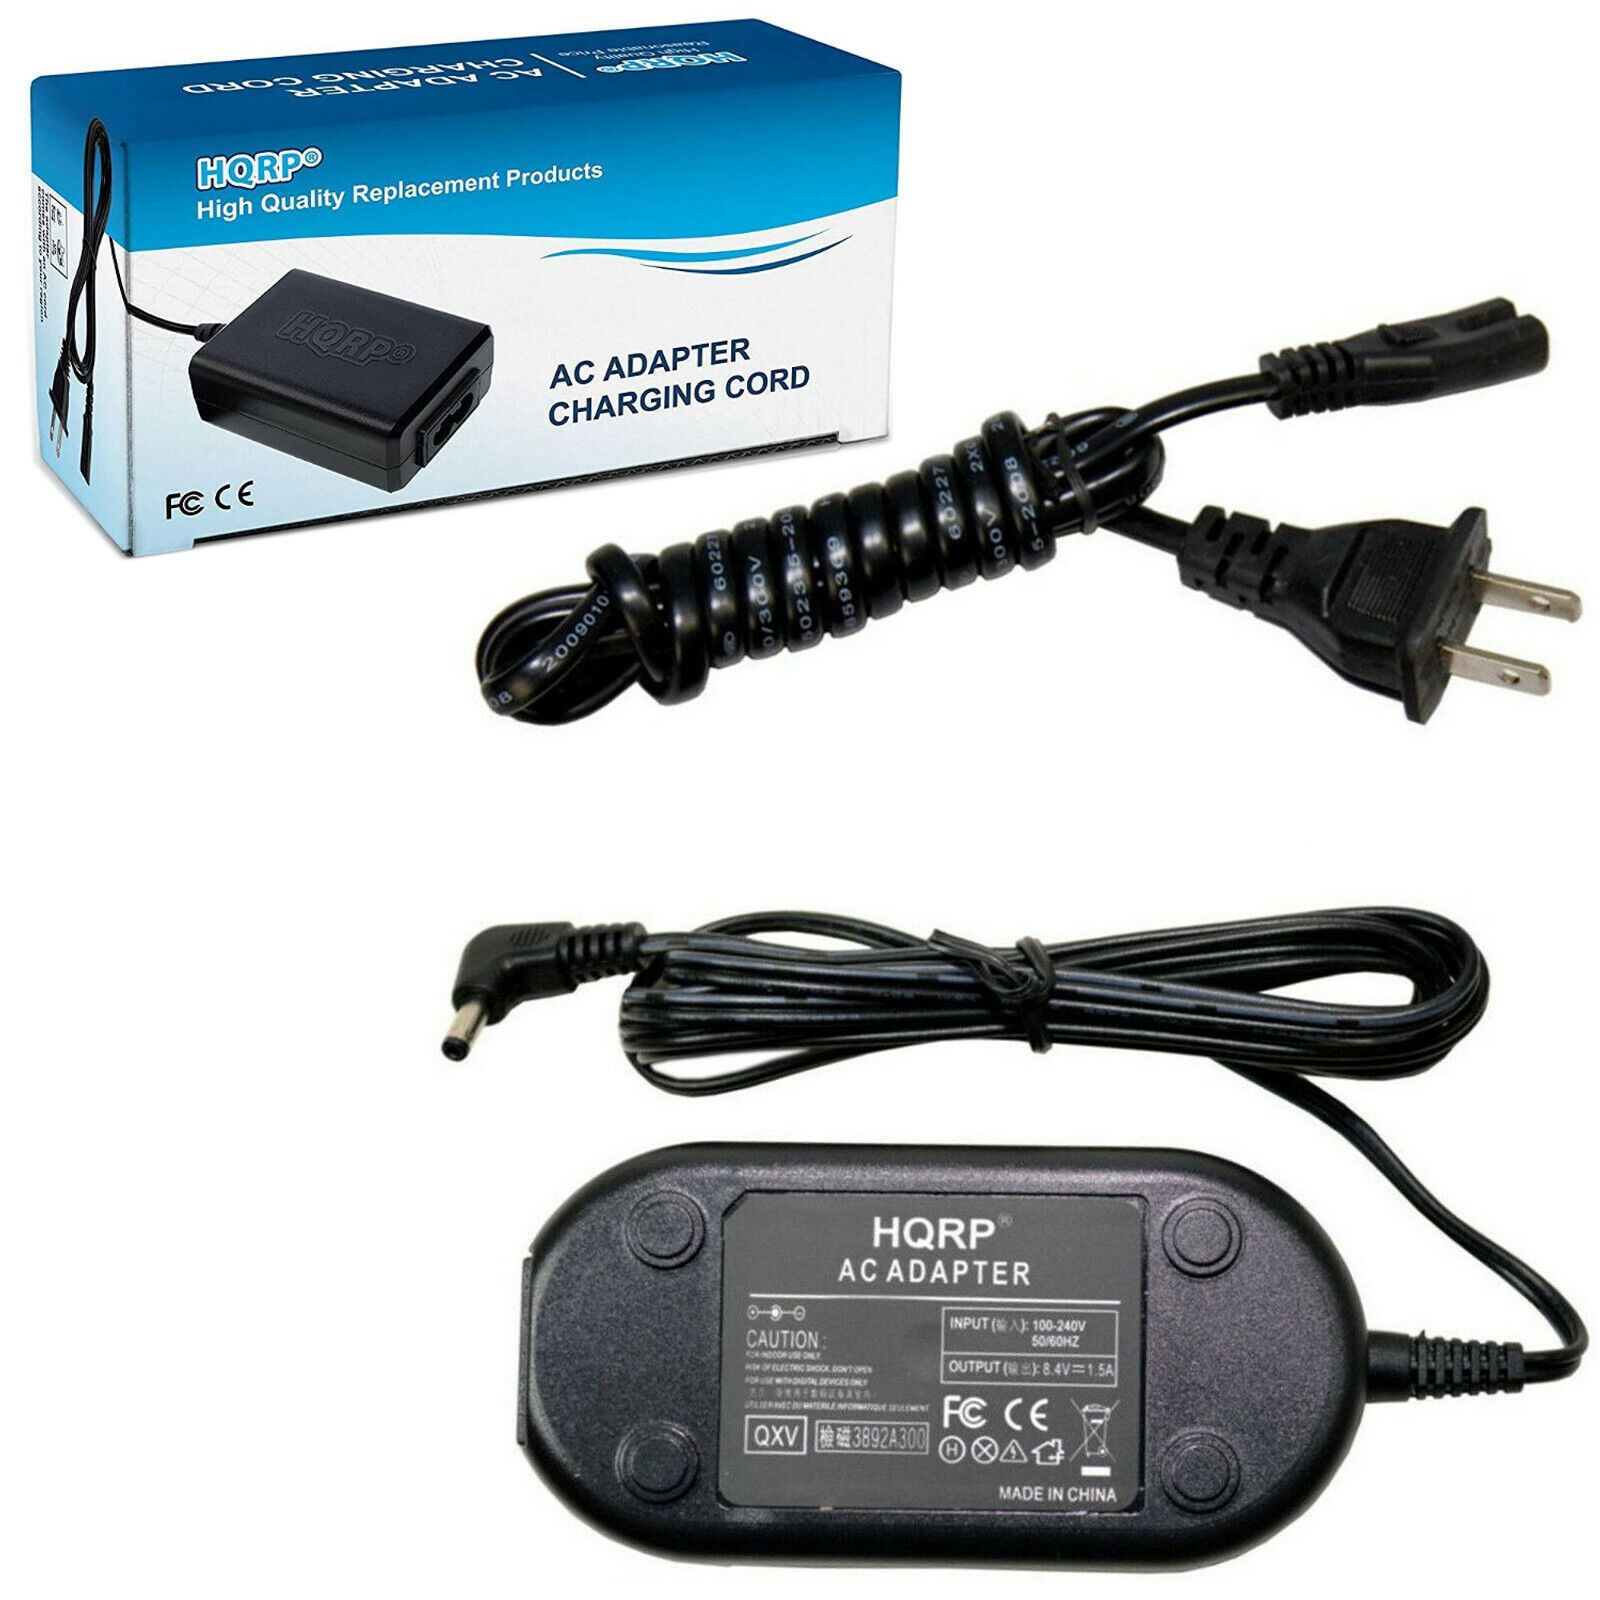 AC Adapter / Charger for Canon ZR60 ZR65MC ZR70MC ZR700 Digital Camcorder CA-570 - $31.99